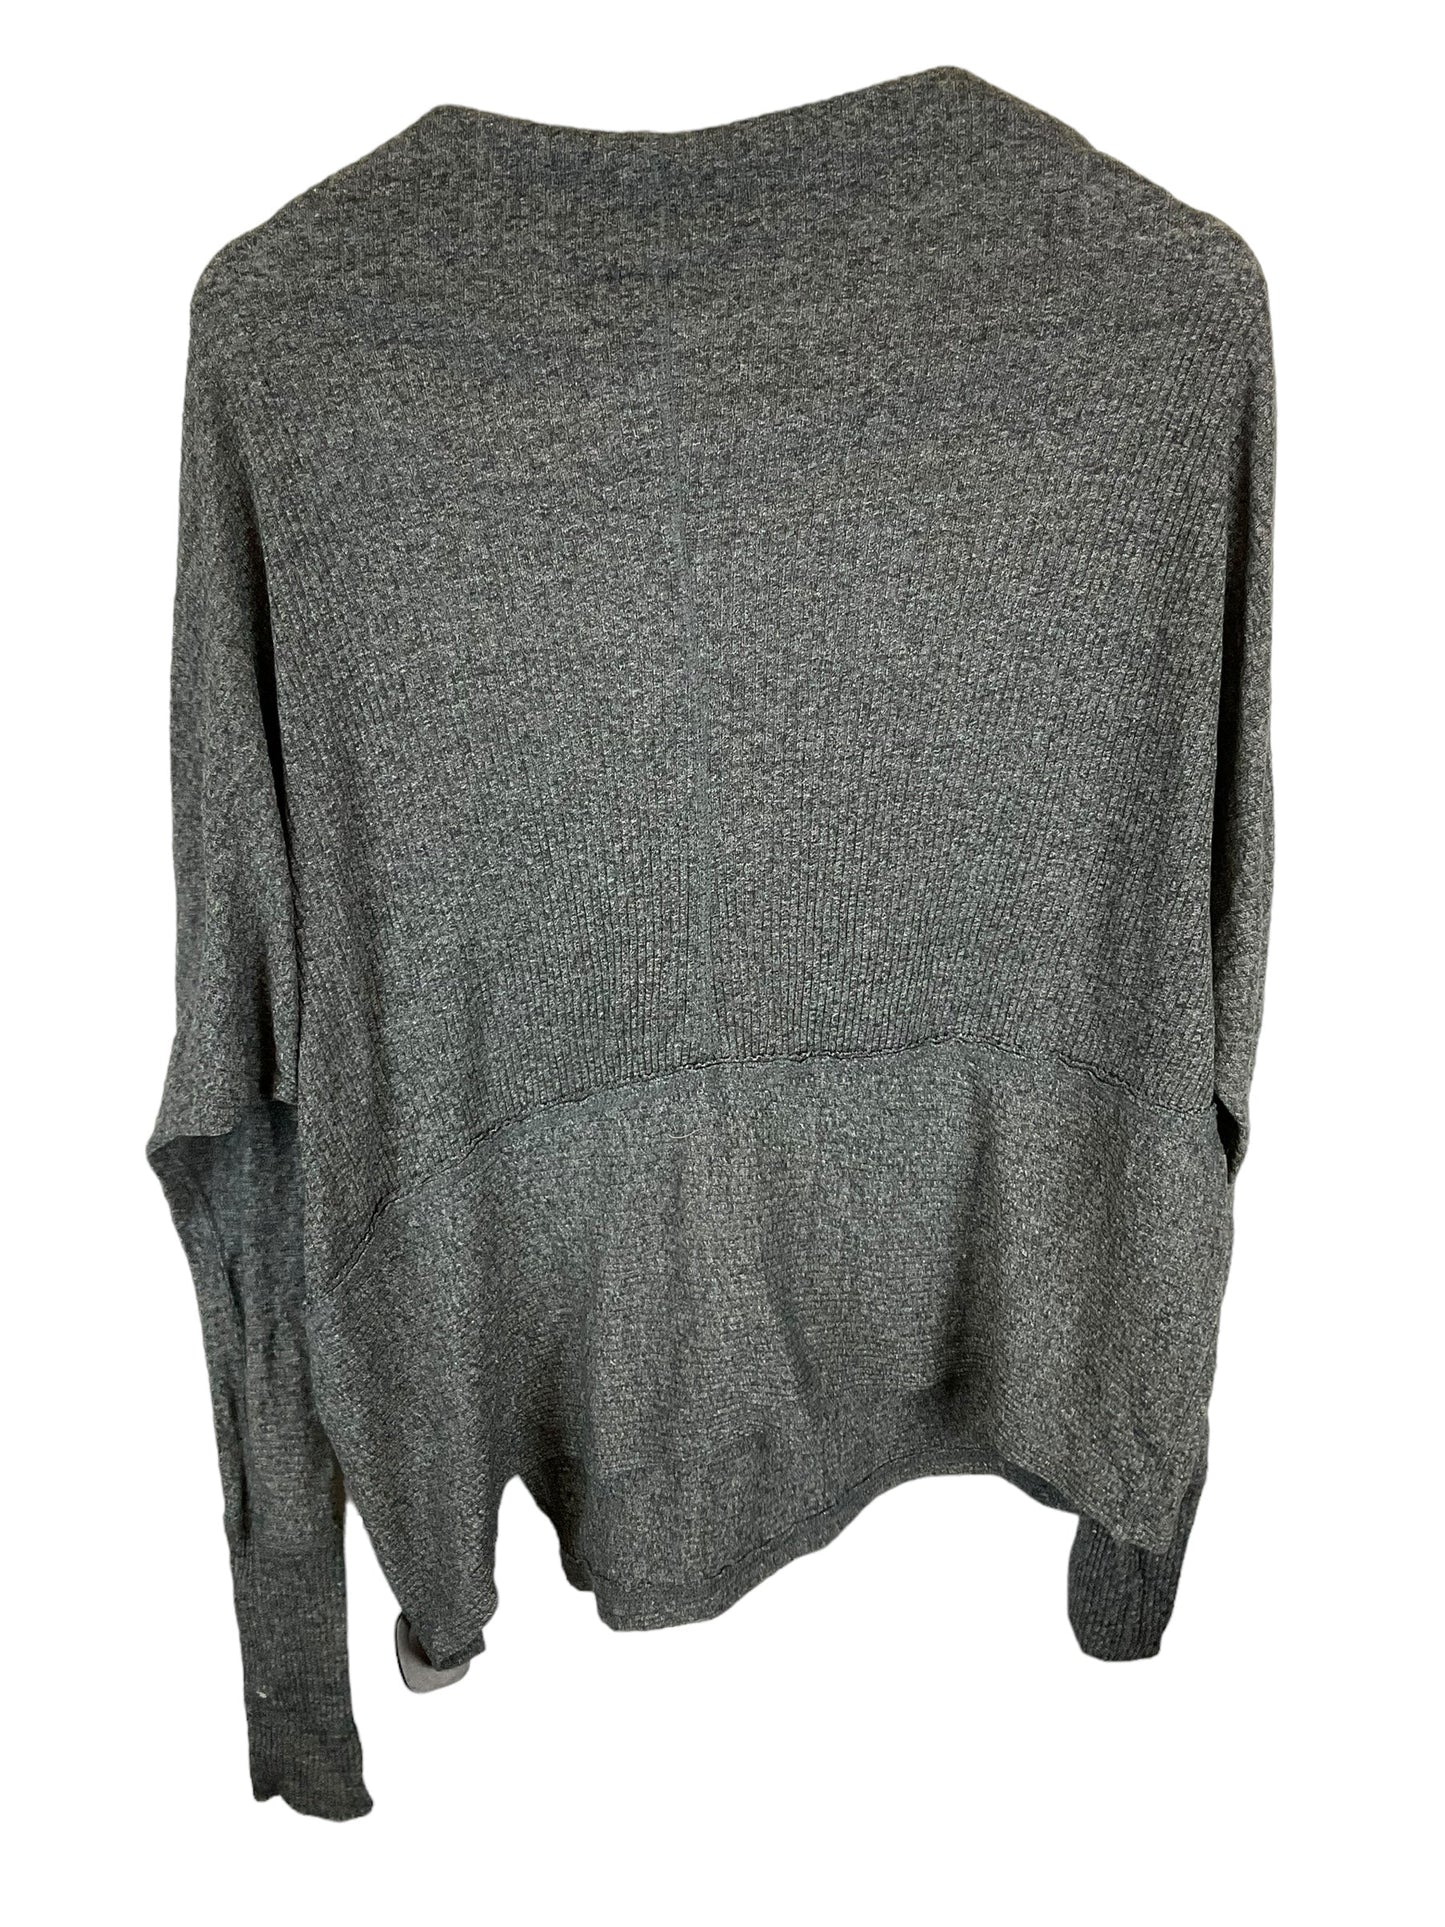 Grey Top Long Sleeve We The Free, Size Xs